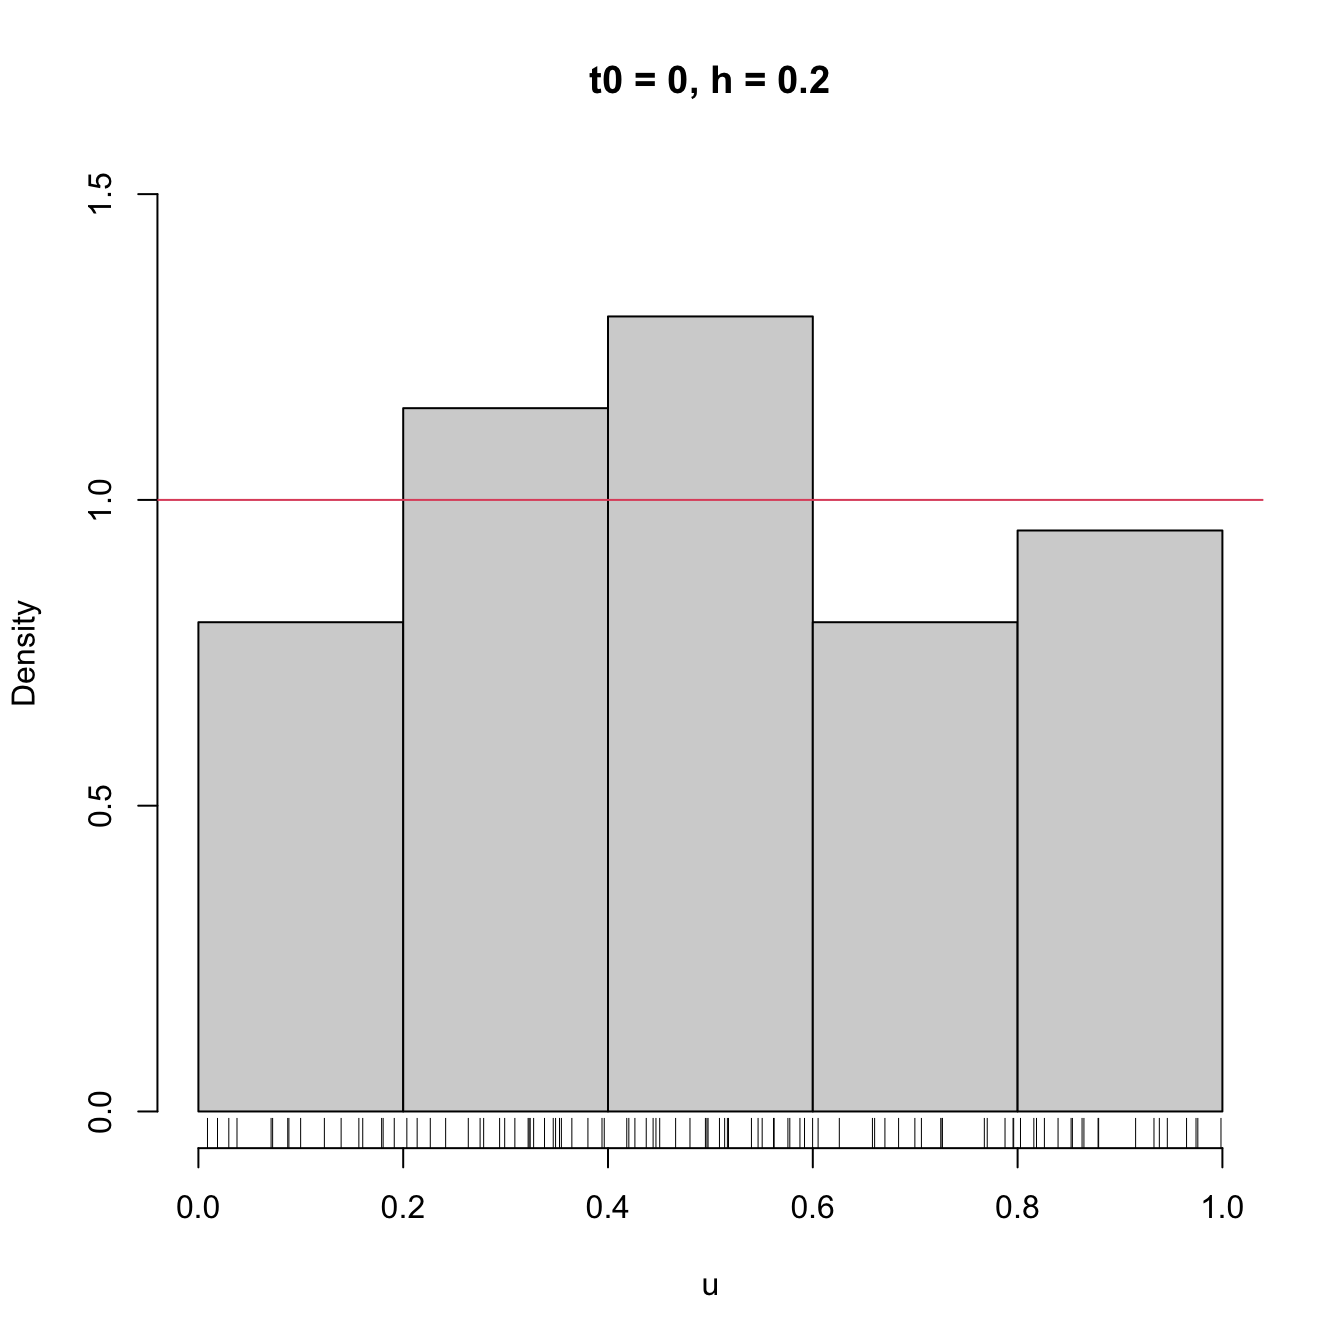 The dependence of the histogram on the origin \(t_0.\) The red curve represents the uniform pdf.